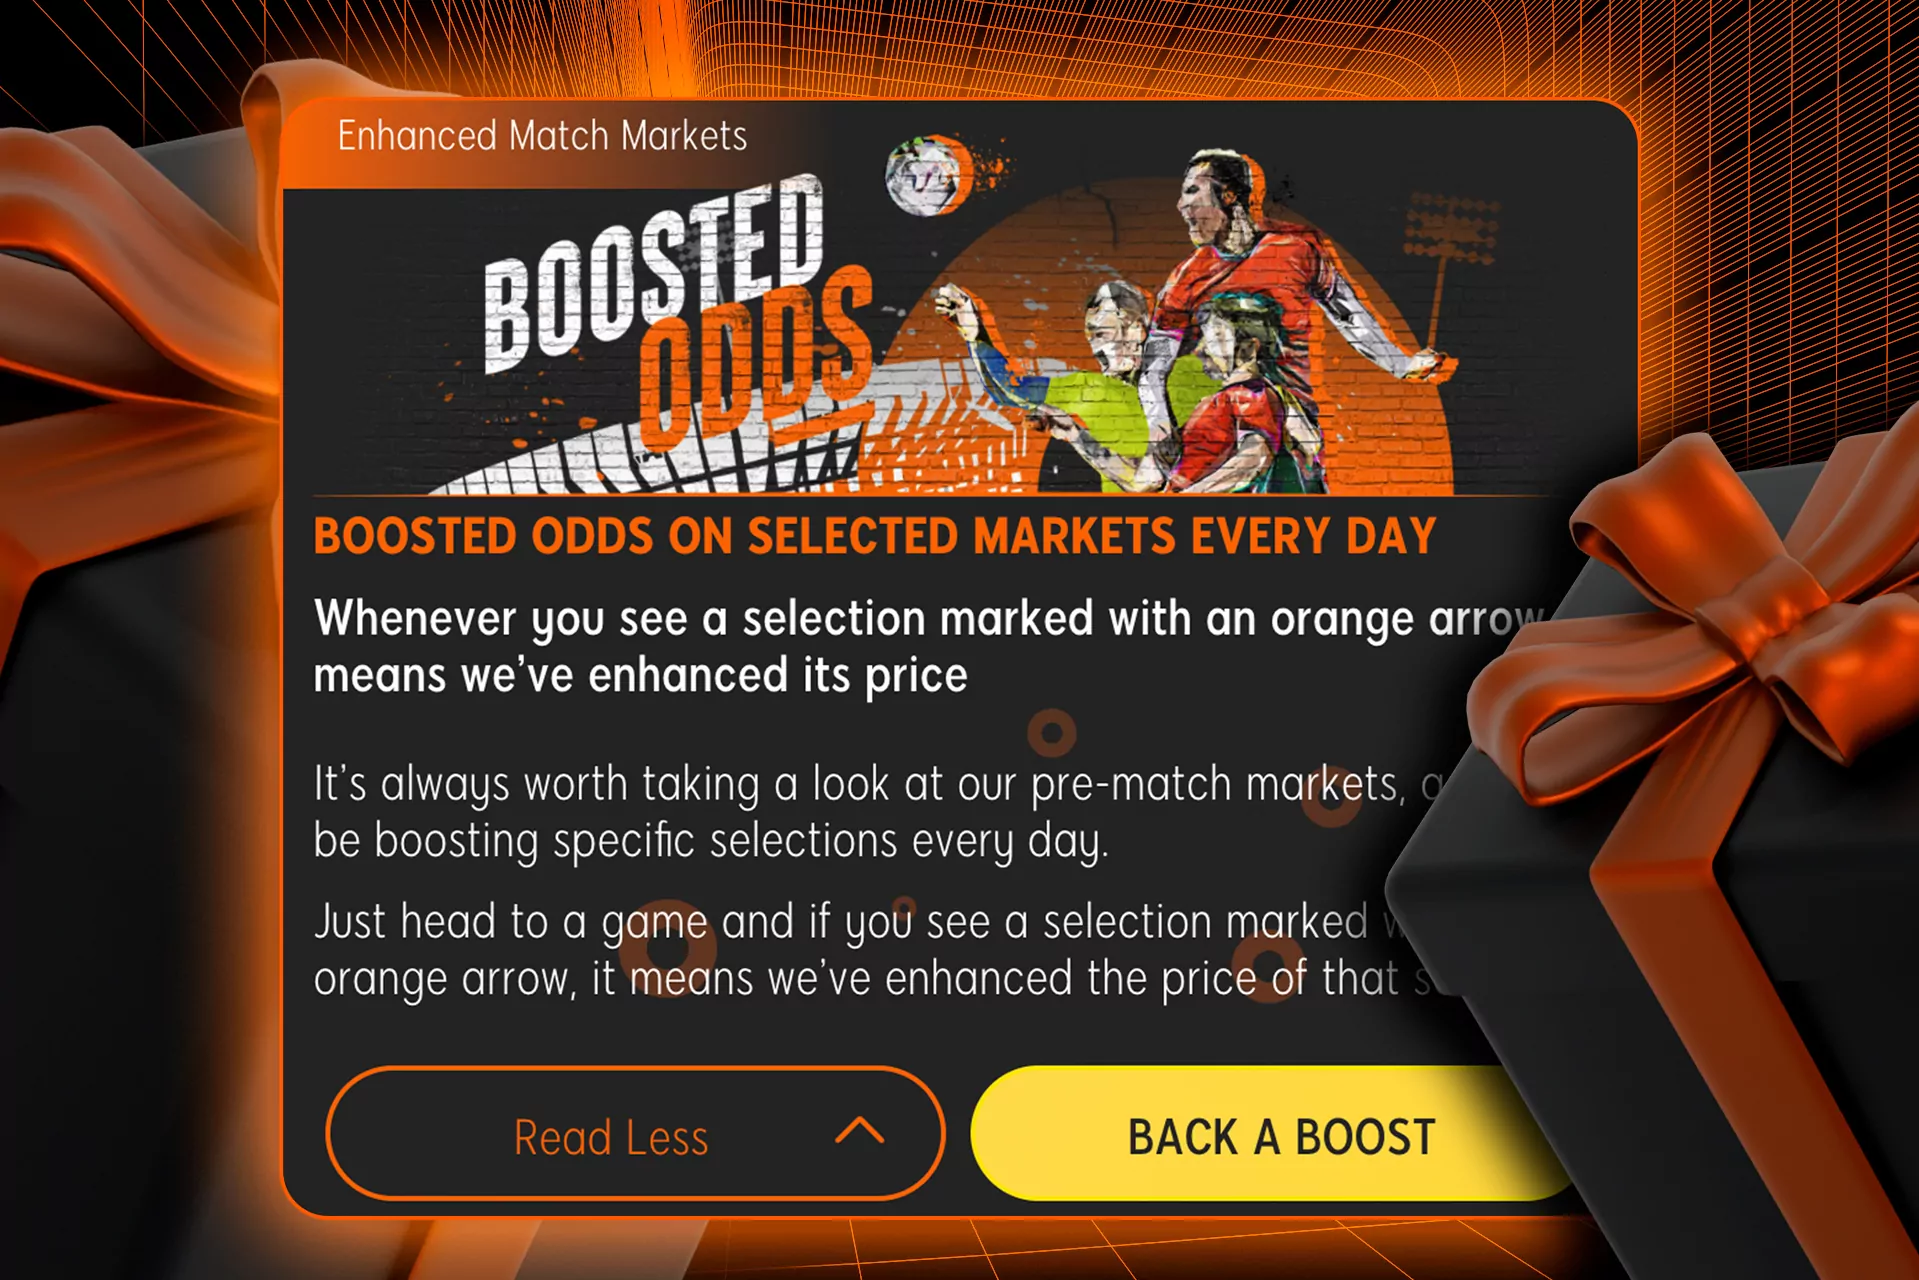 Receive the boosted odds daily.